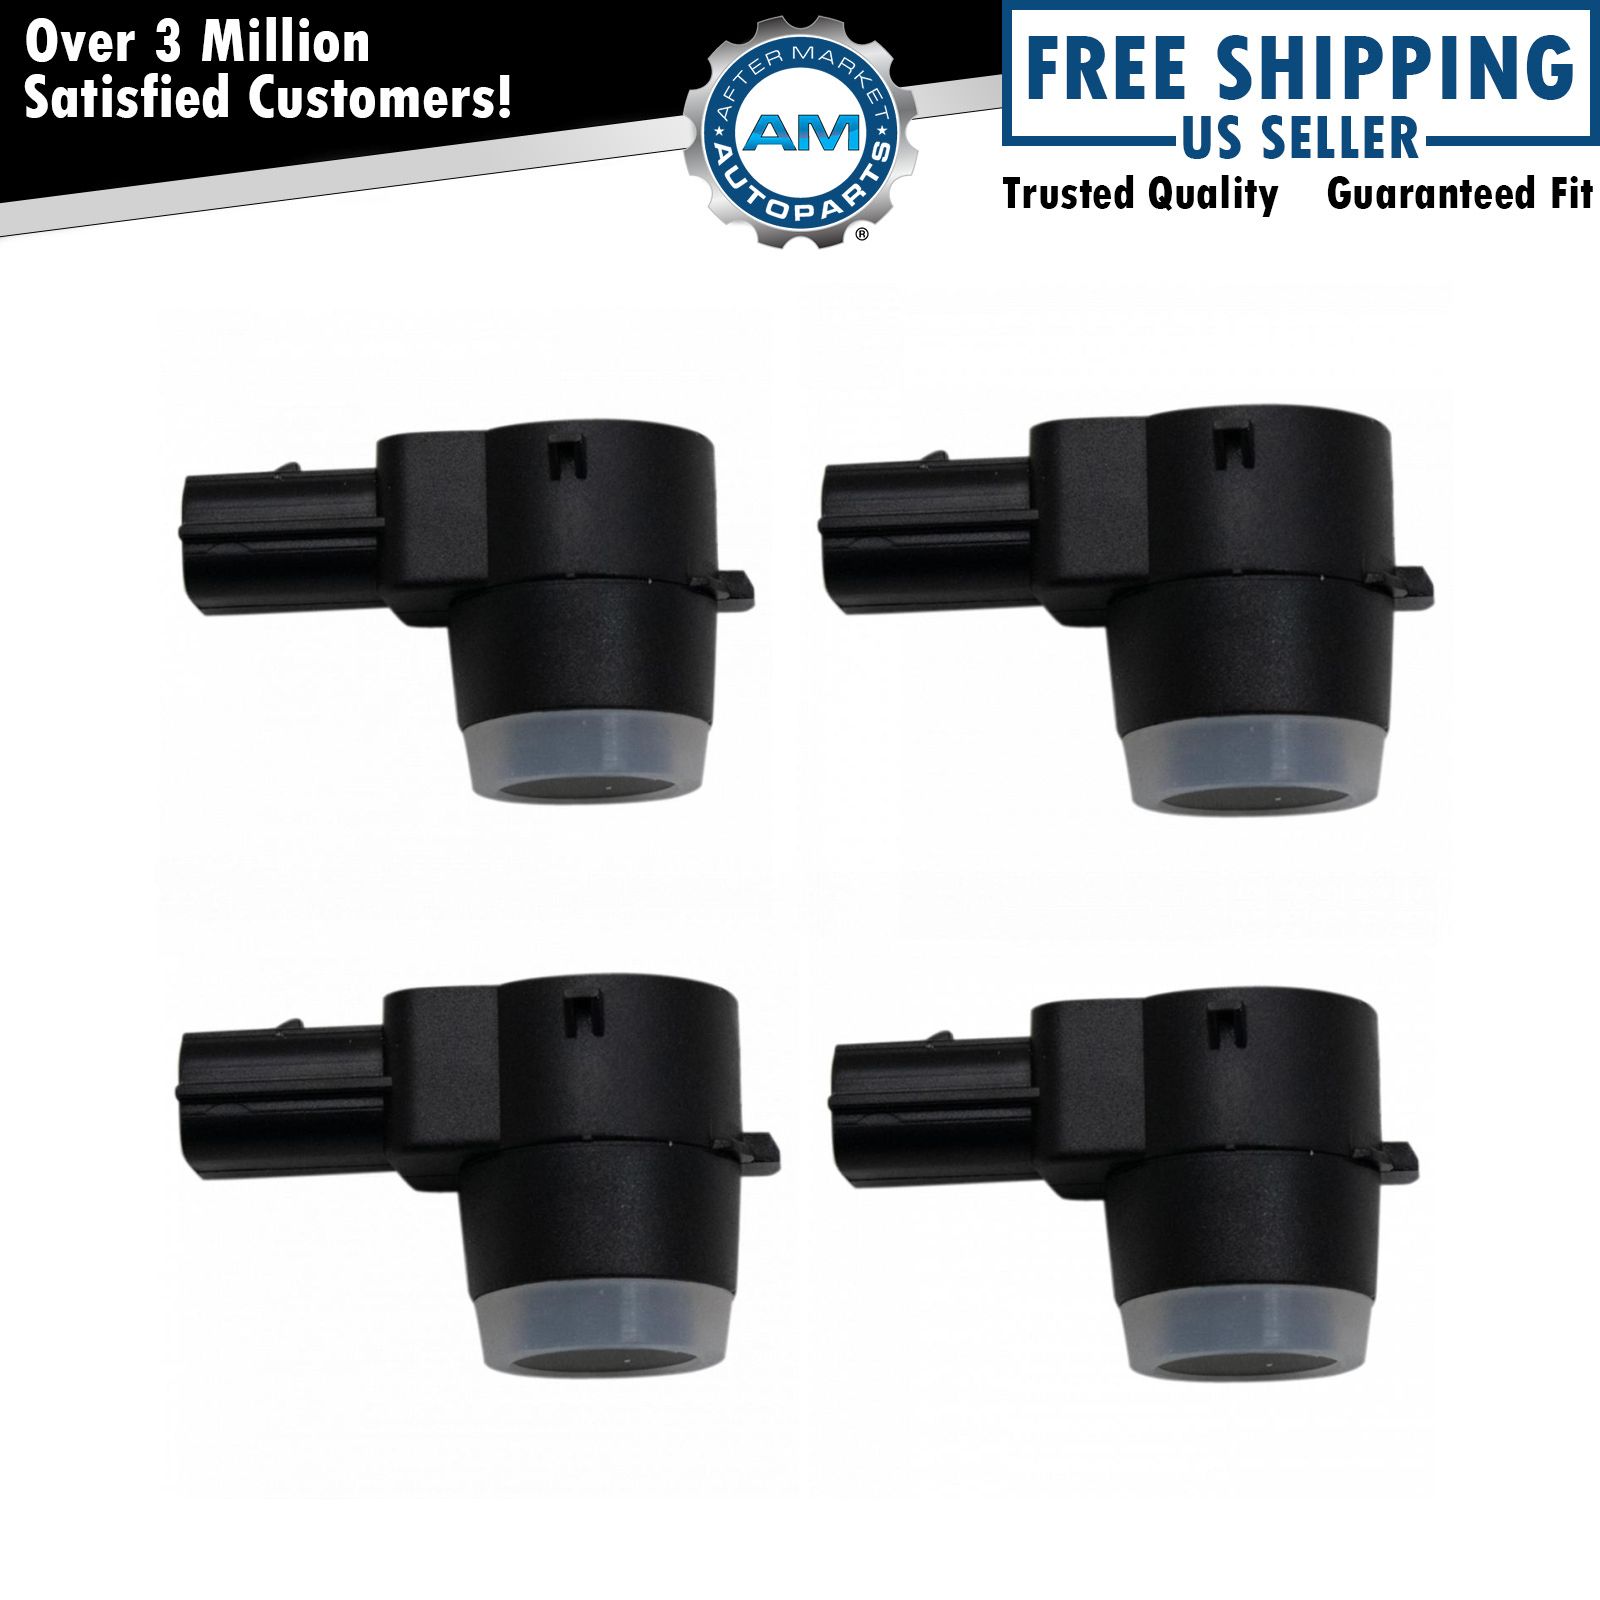 4 Piece Bumper Parking Assist Object Sensor Kit for Buick Cadillac Chevy GMC New